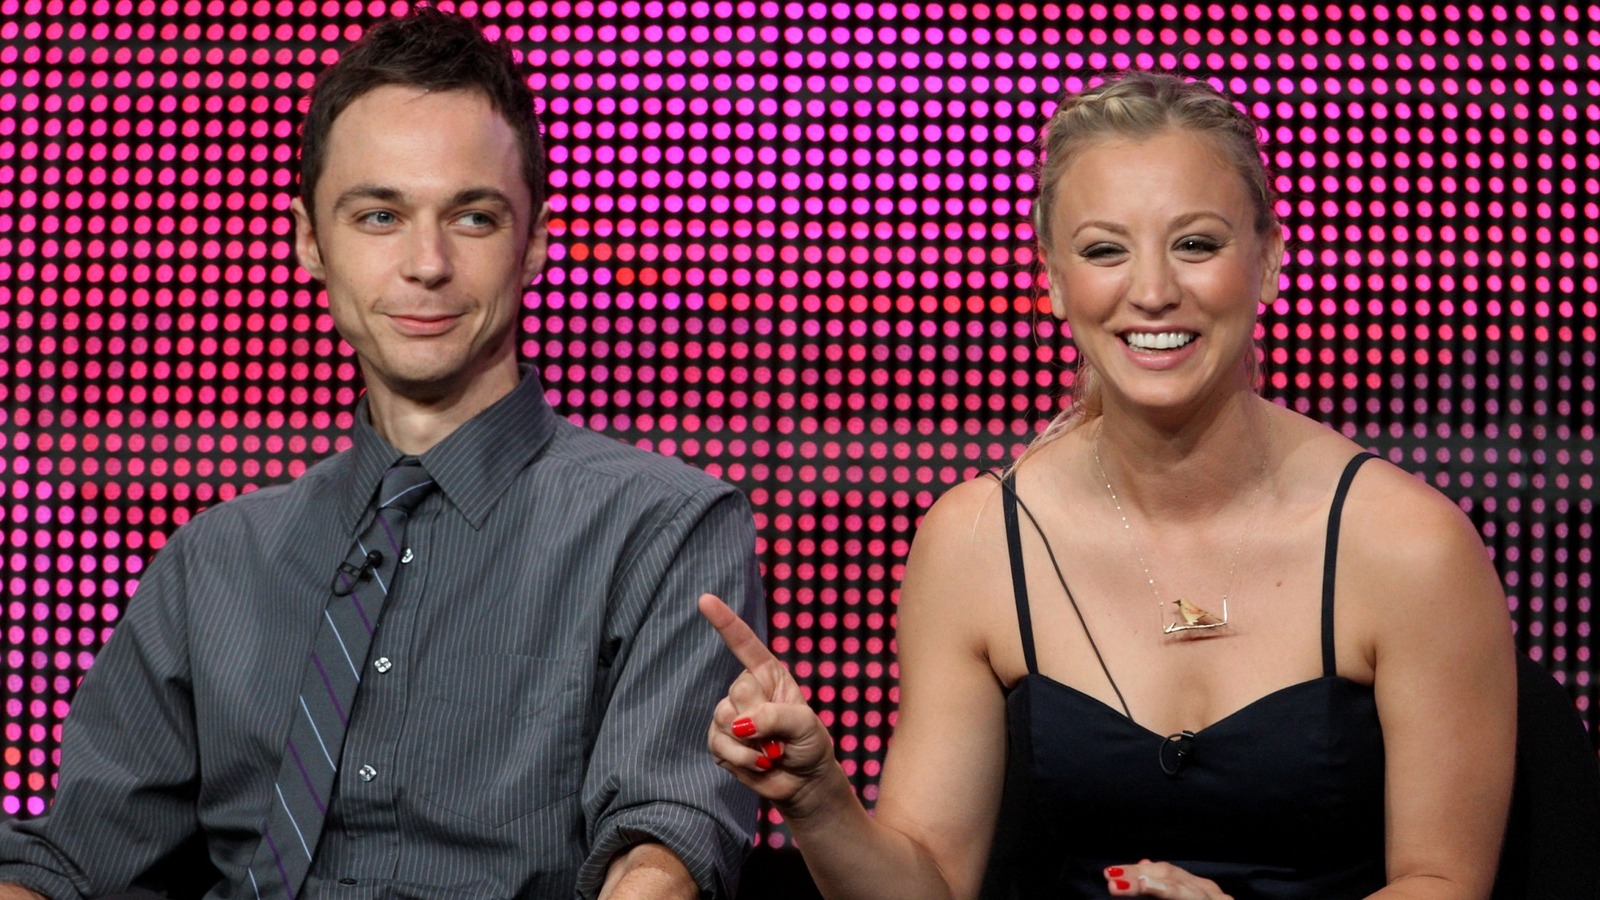 Jim Parsons Talks About the Unexpected Silence During His Iconic Kiss Scene with Kaley Cuoco on The Big Bang Theory